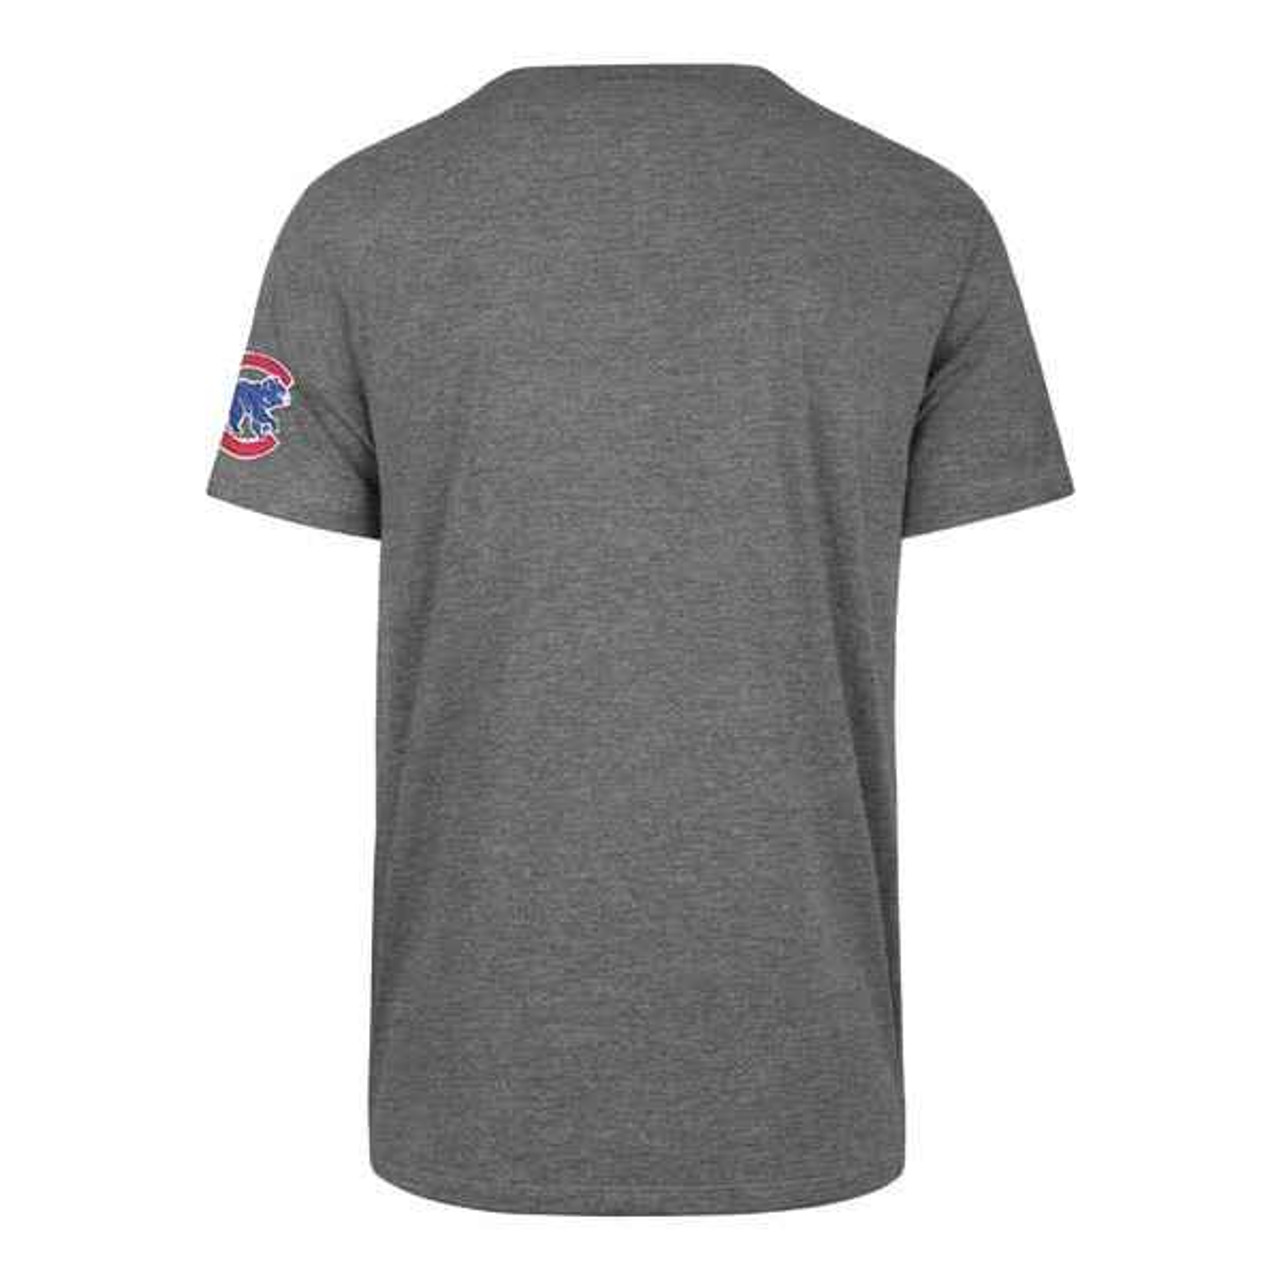 Buy Chicago Cubs Slate Grey Tee | Fieldhouse Tee for Sale